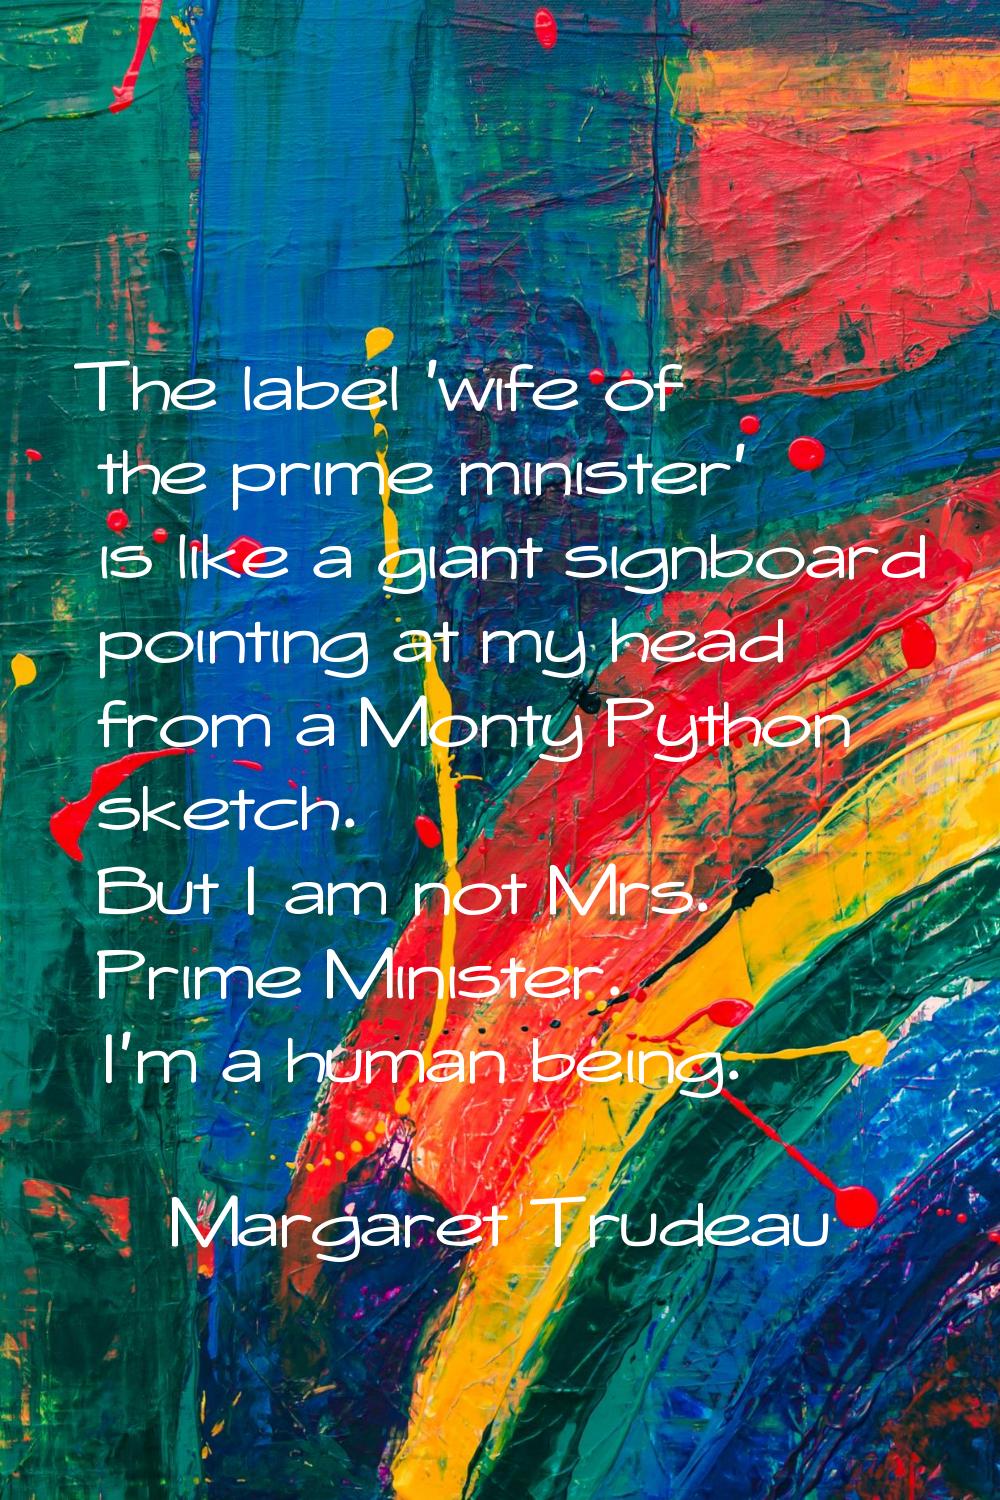 The label 'wife of the prime minister' is like a giant signboard pointing at my head from a Monty P